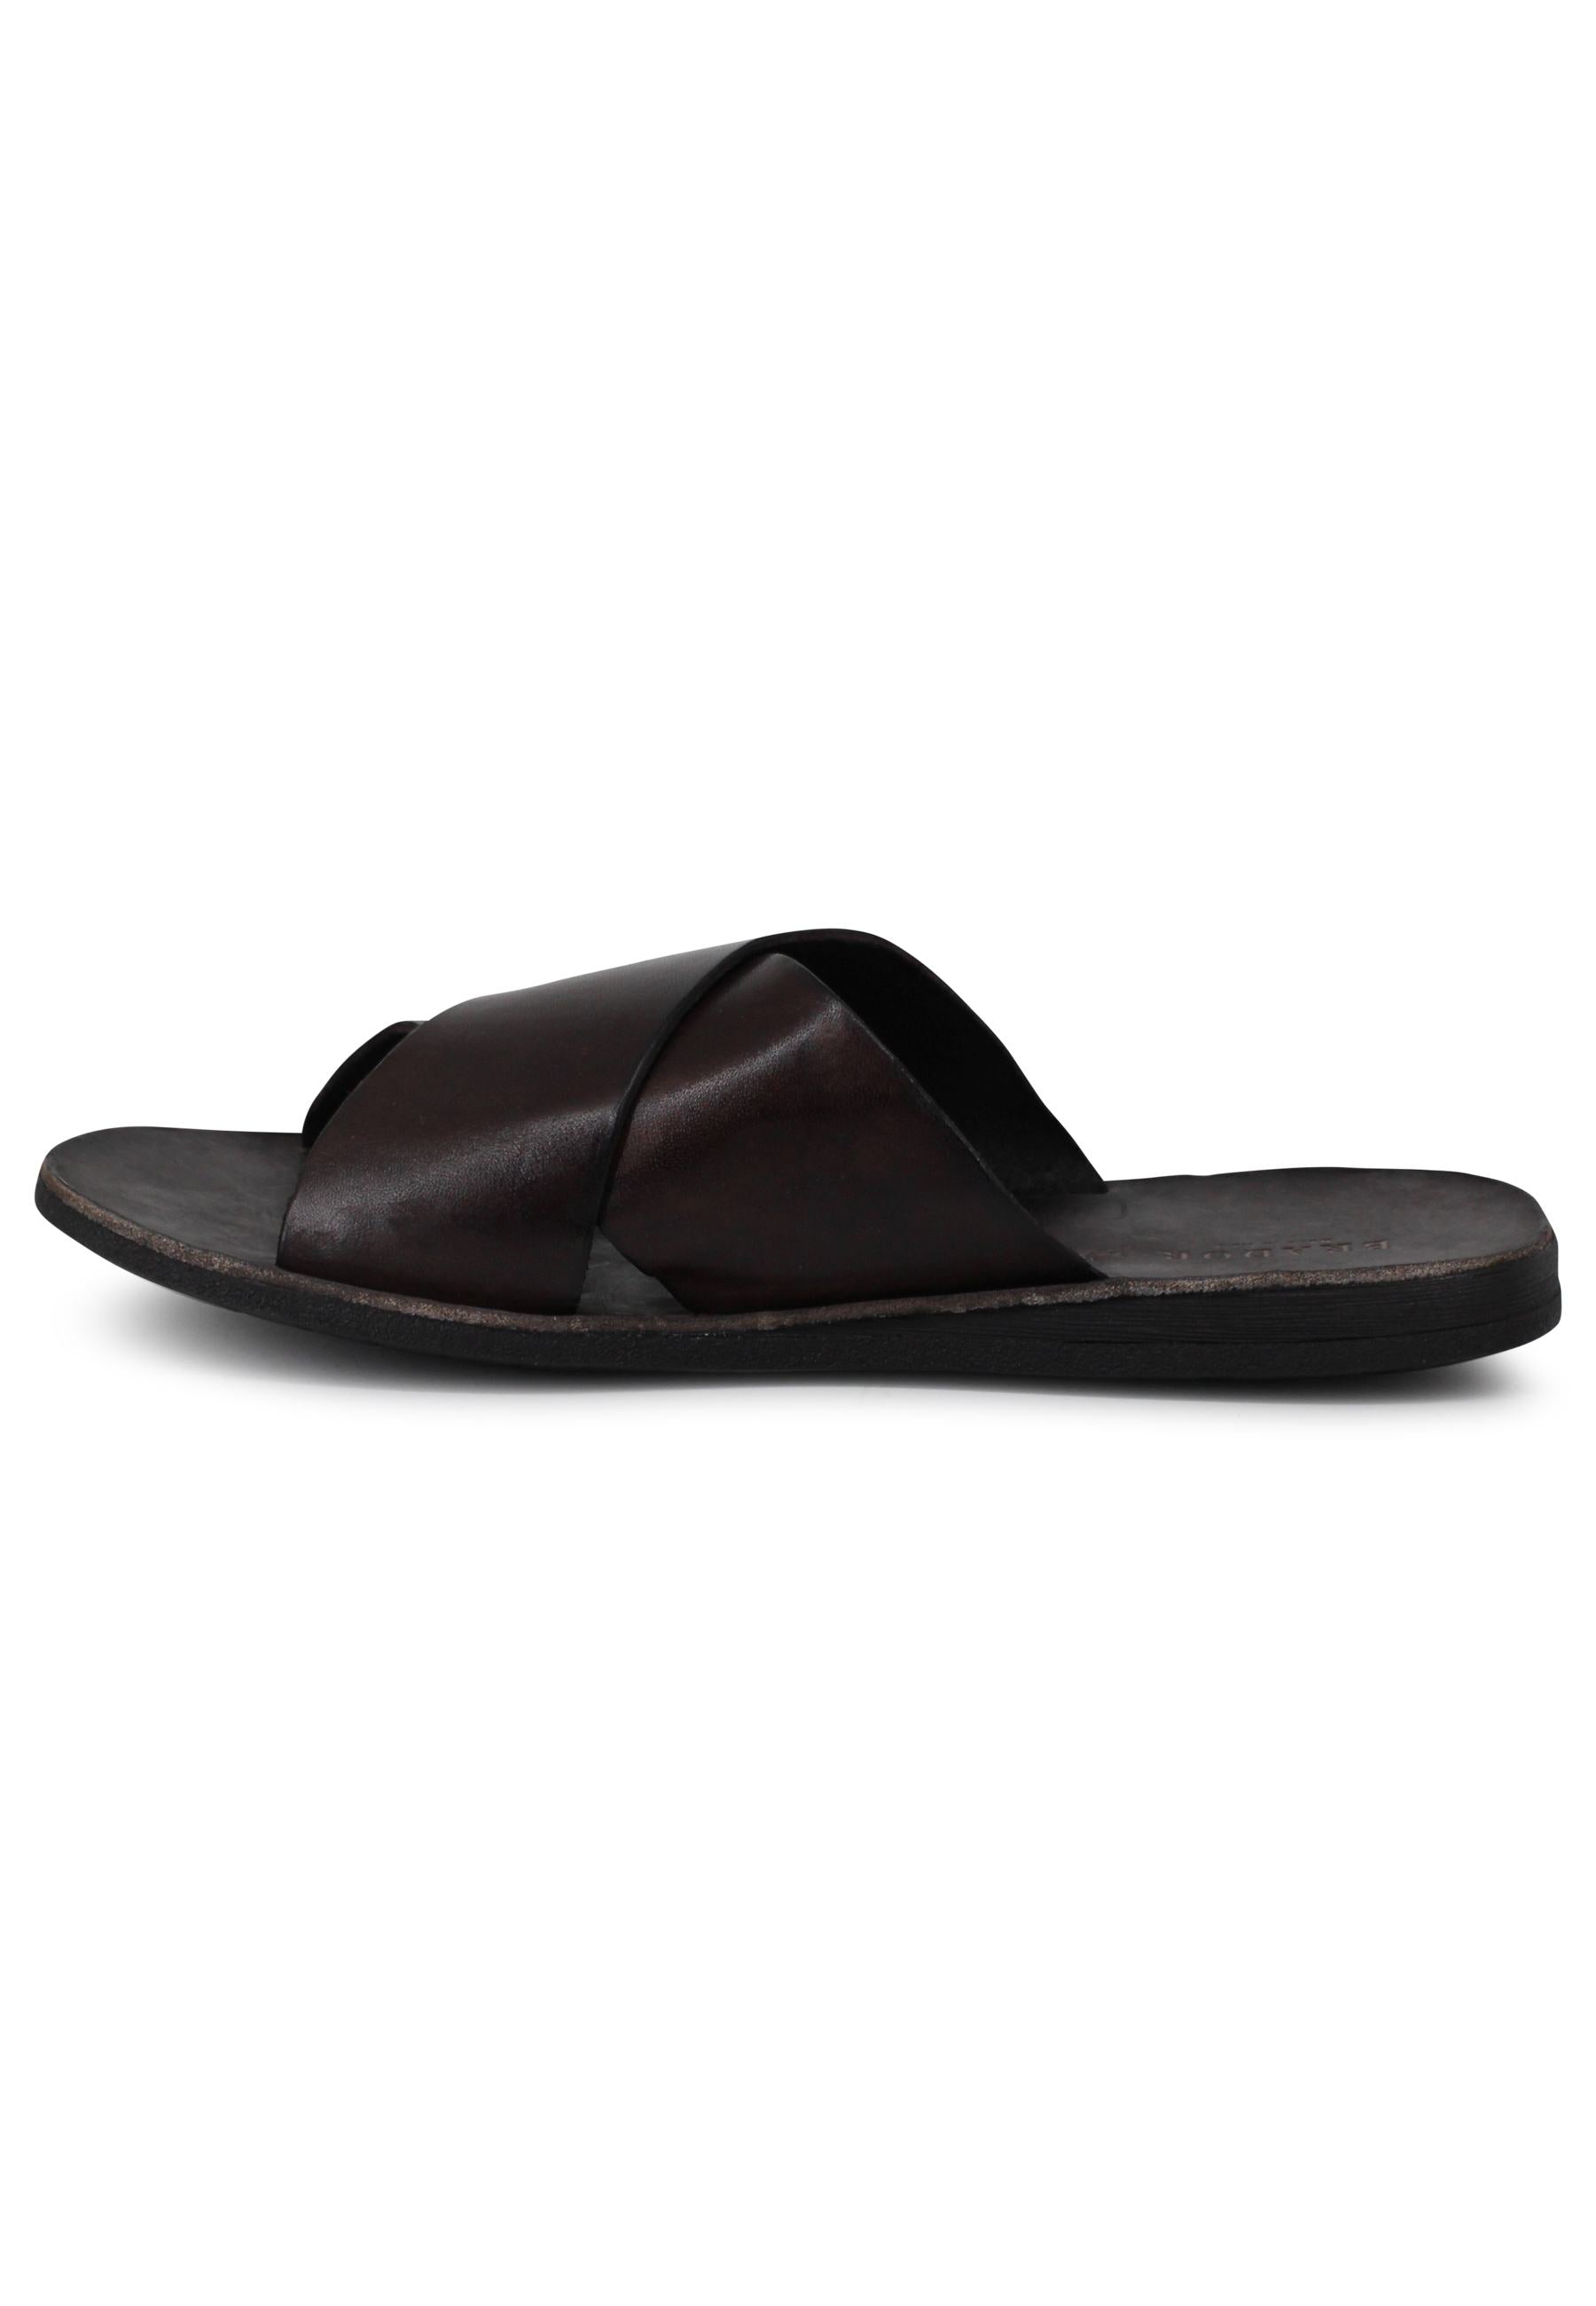 Men's brown leather sandals with double cross